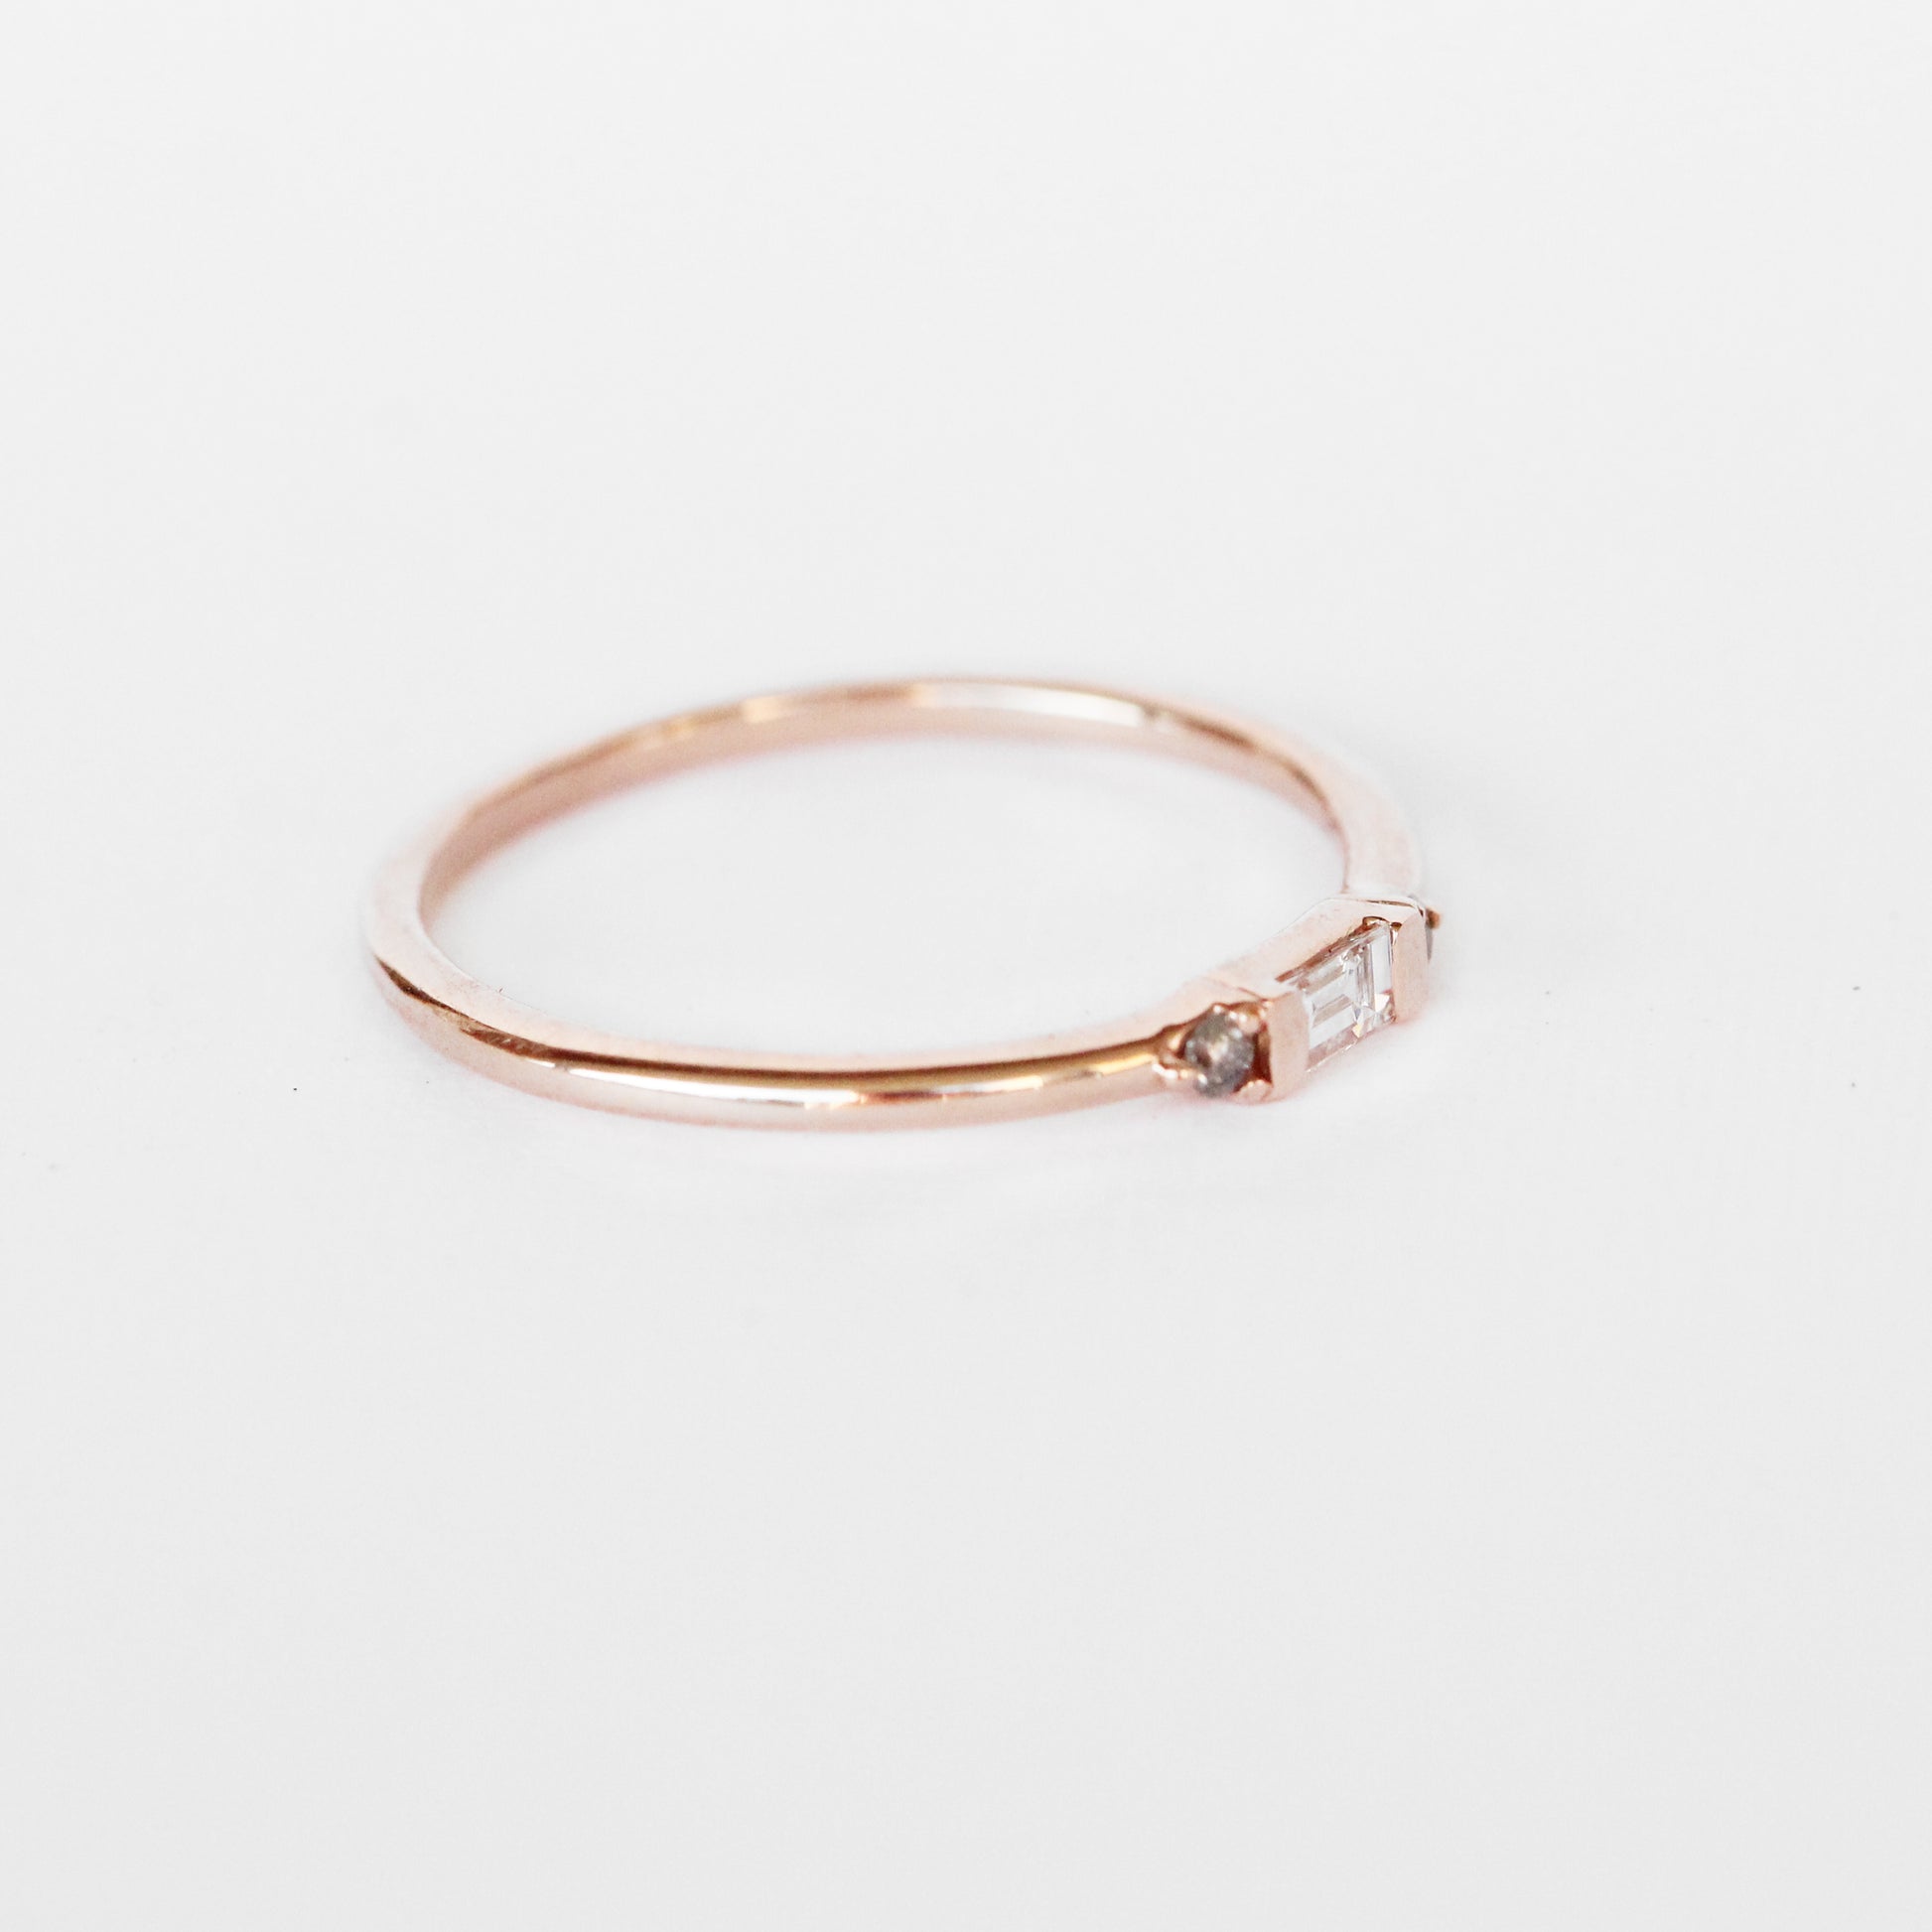 Phoebe Minimal Baguette + Round Diamond Ring - Stackable Band in Your Choice of 14k Gold - Midwinter Co. Alternative Bridal Rings and Modern Fine Jewelry